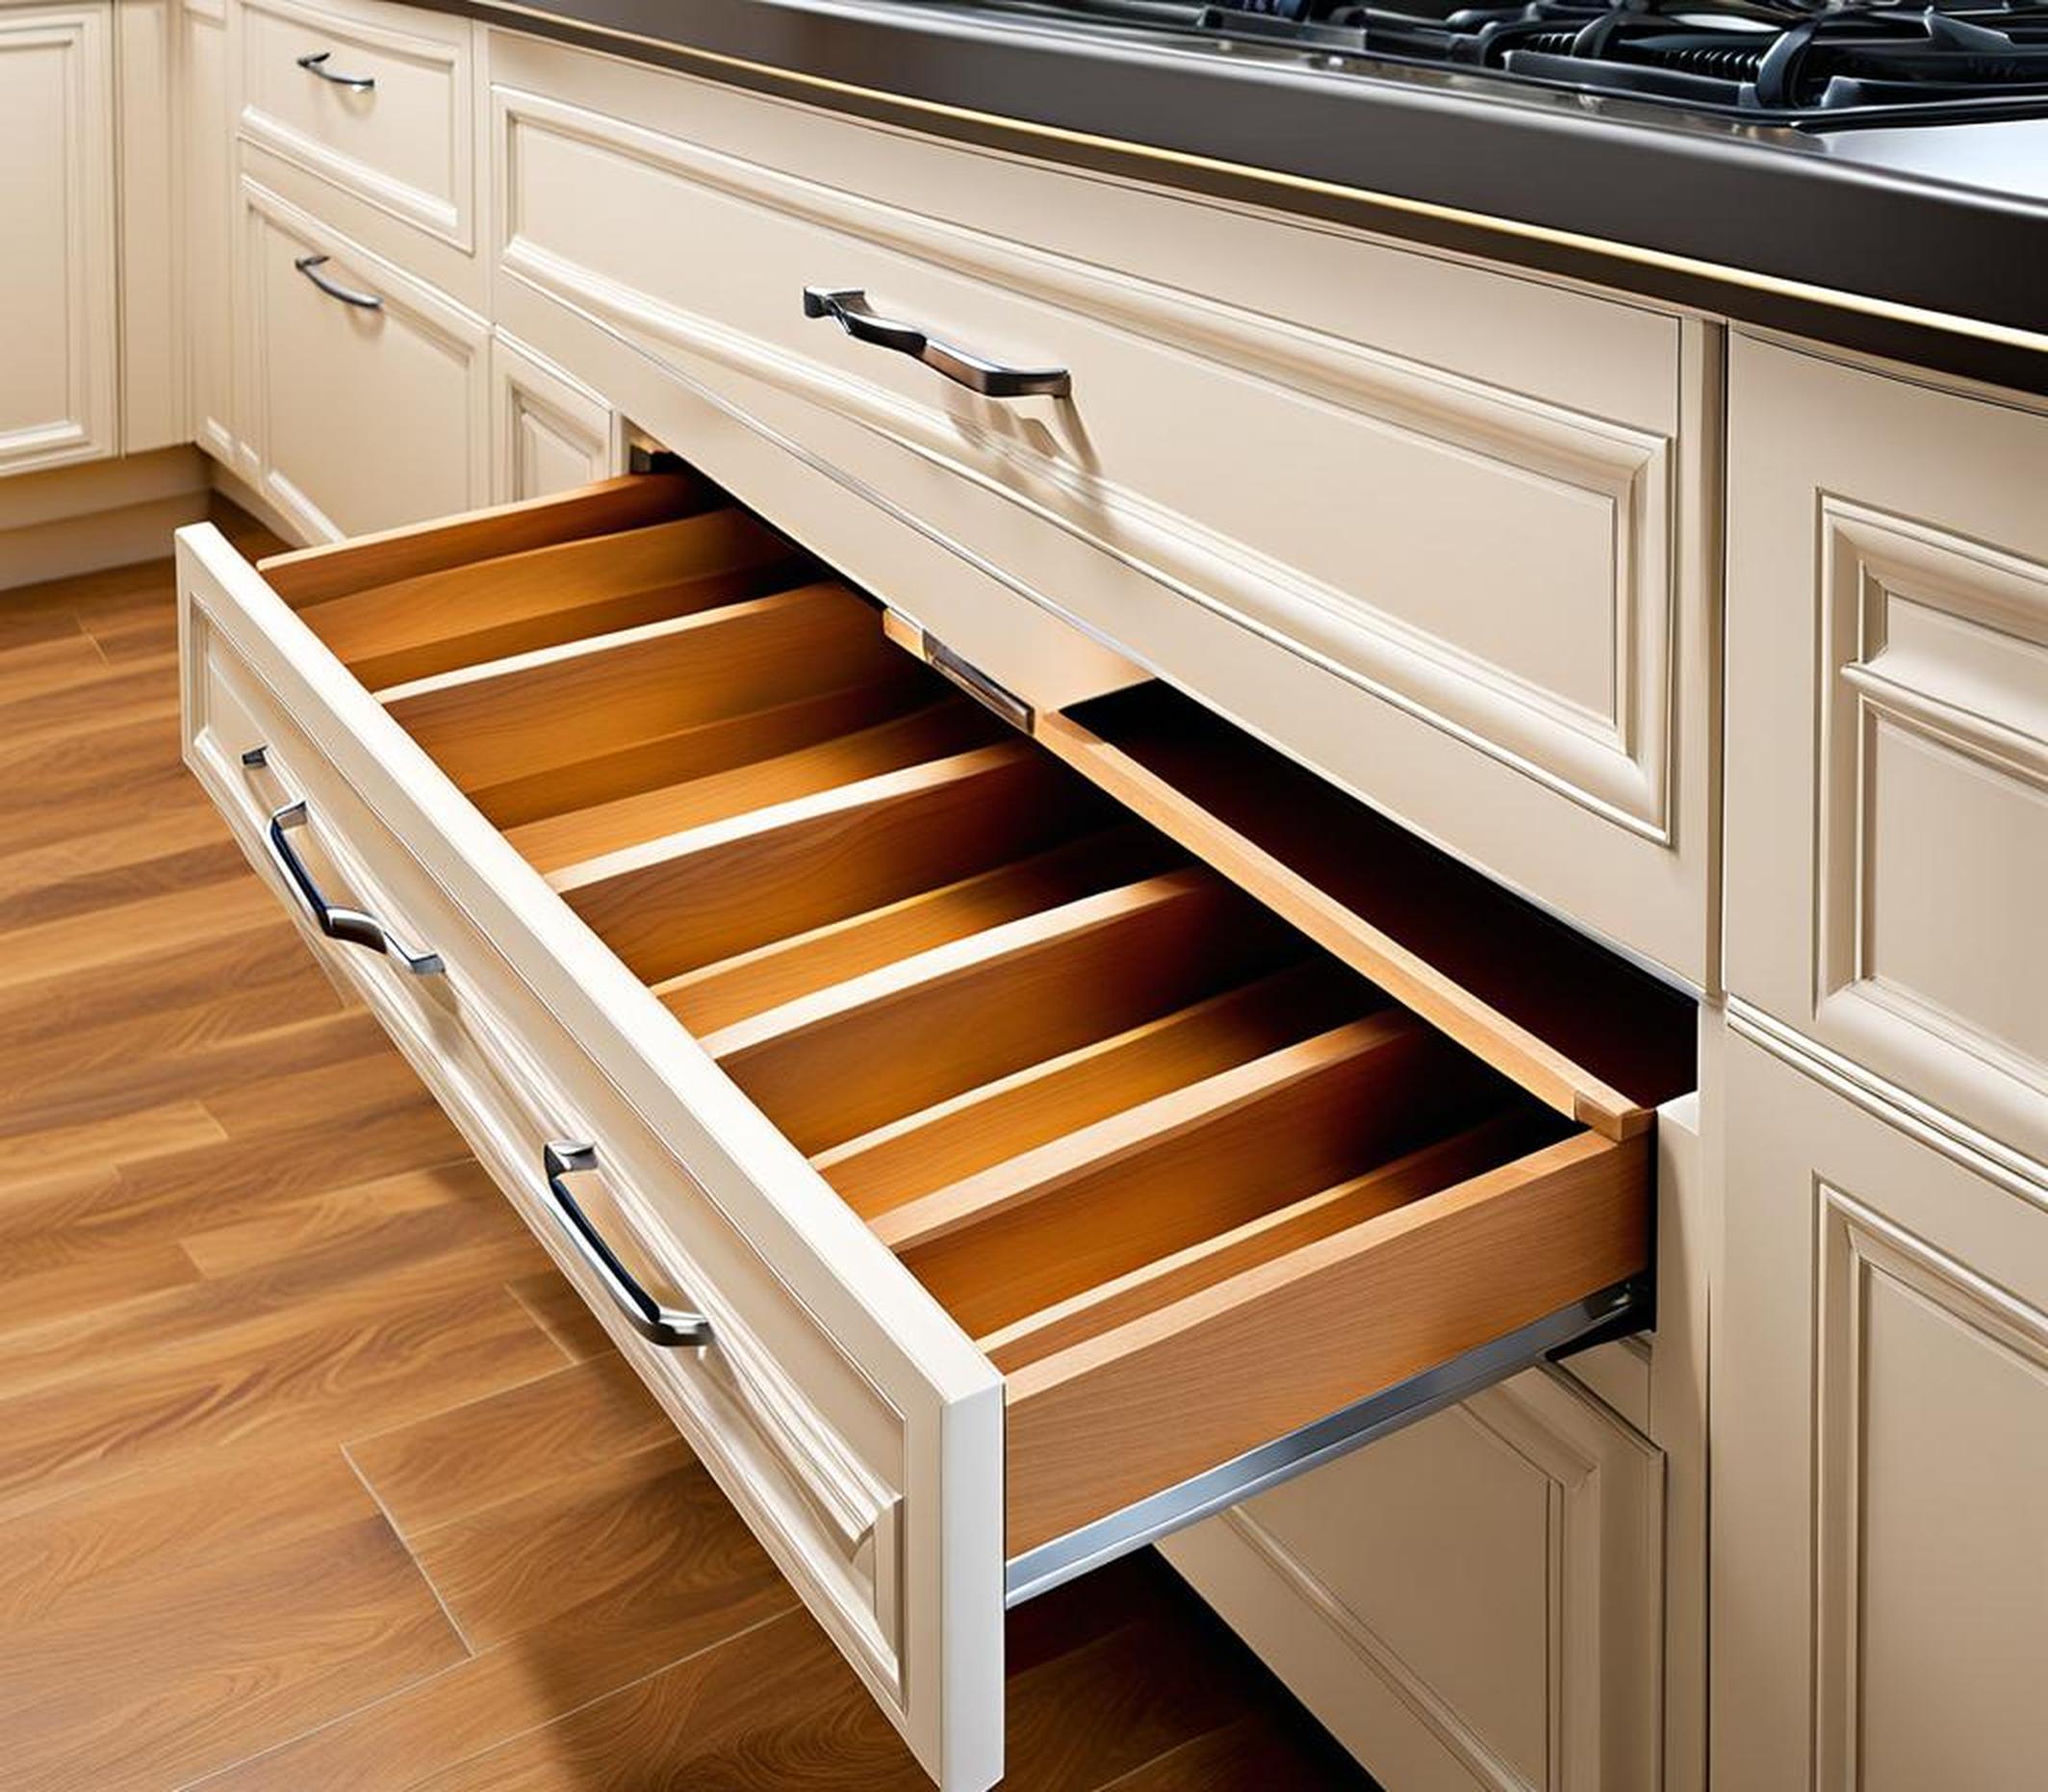 standard height of kitchen drawers